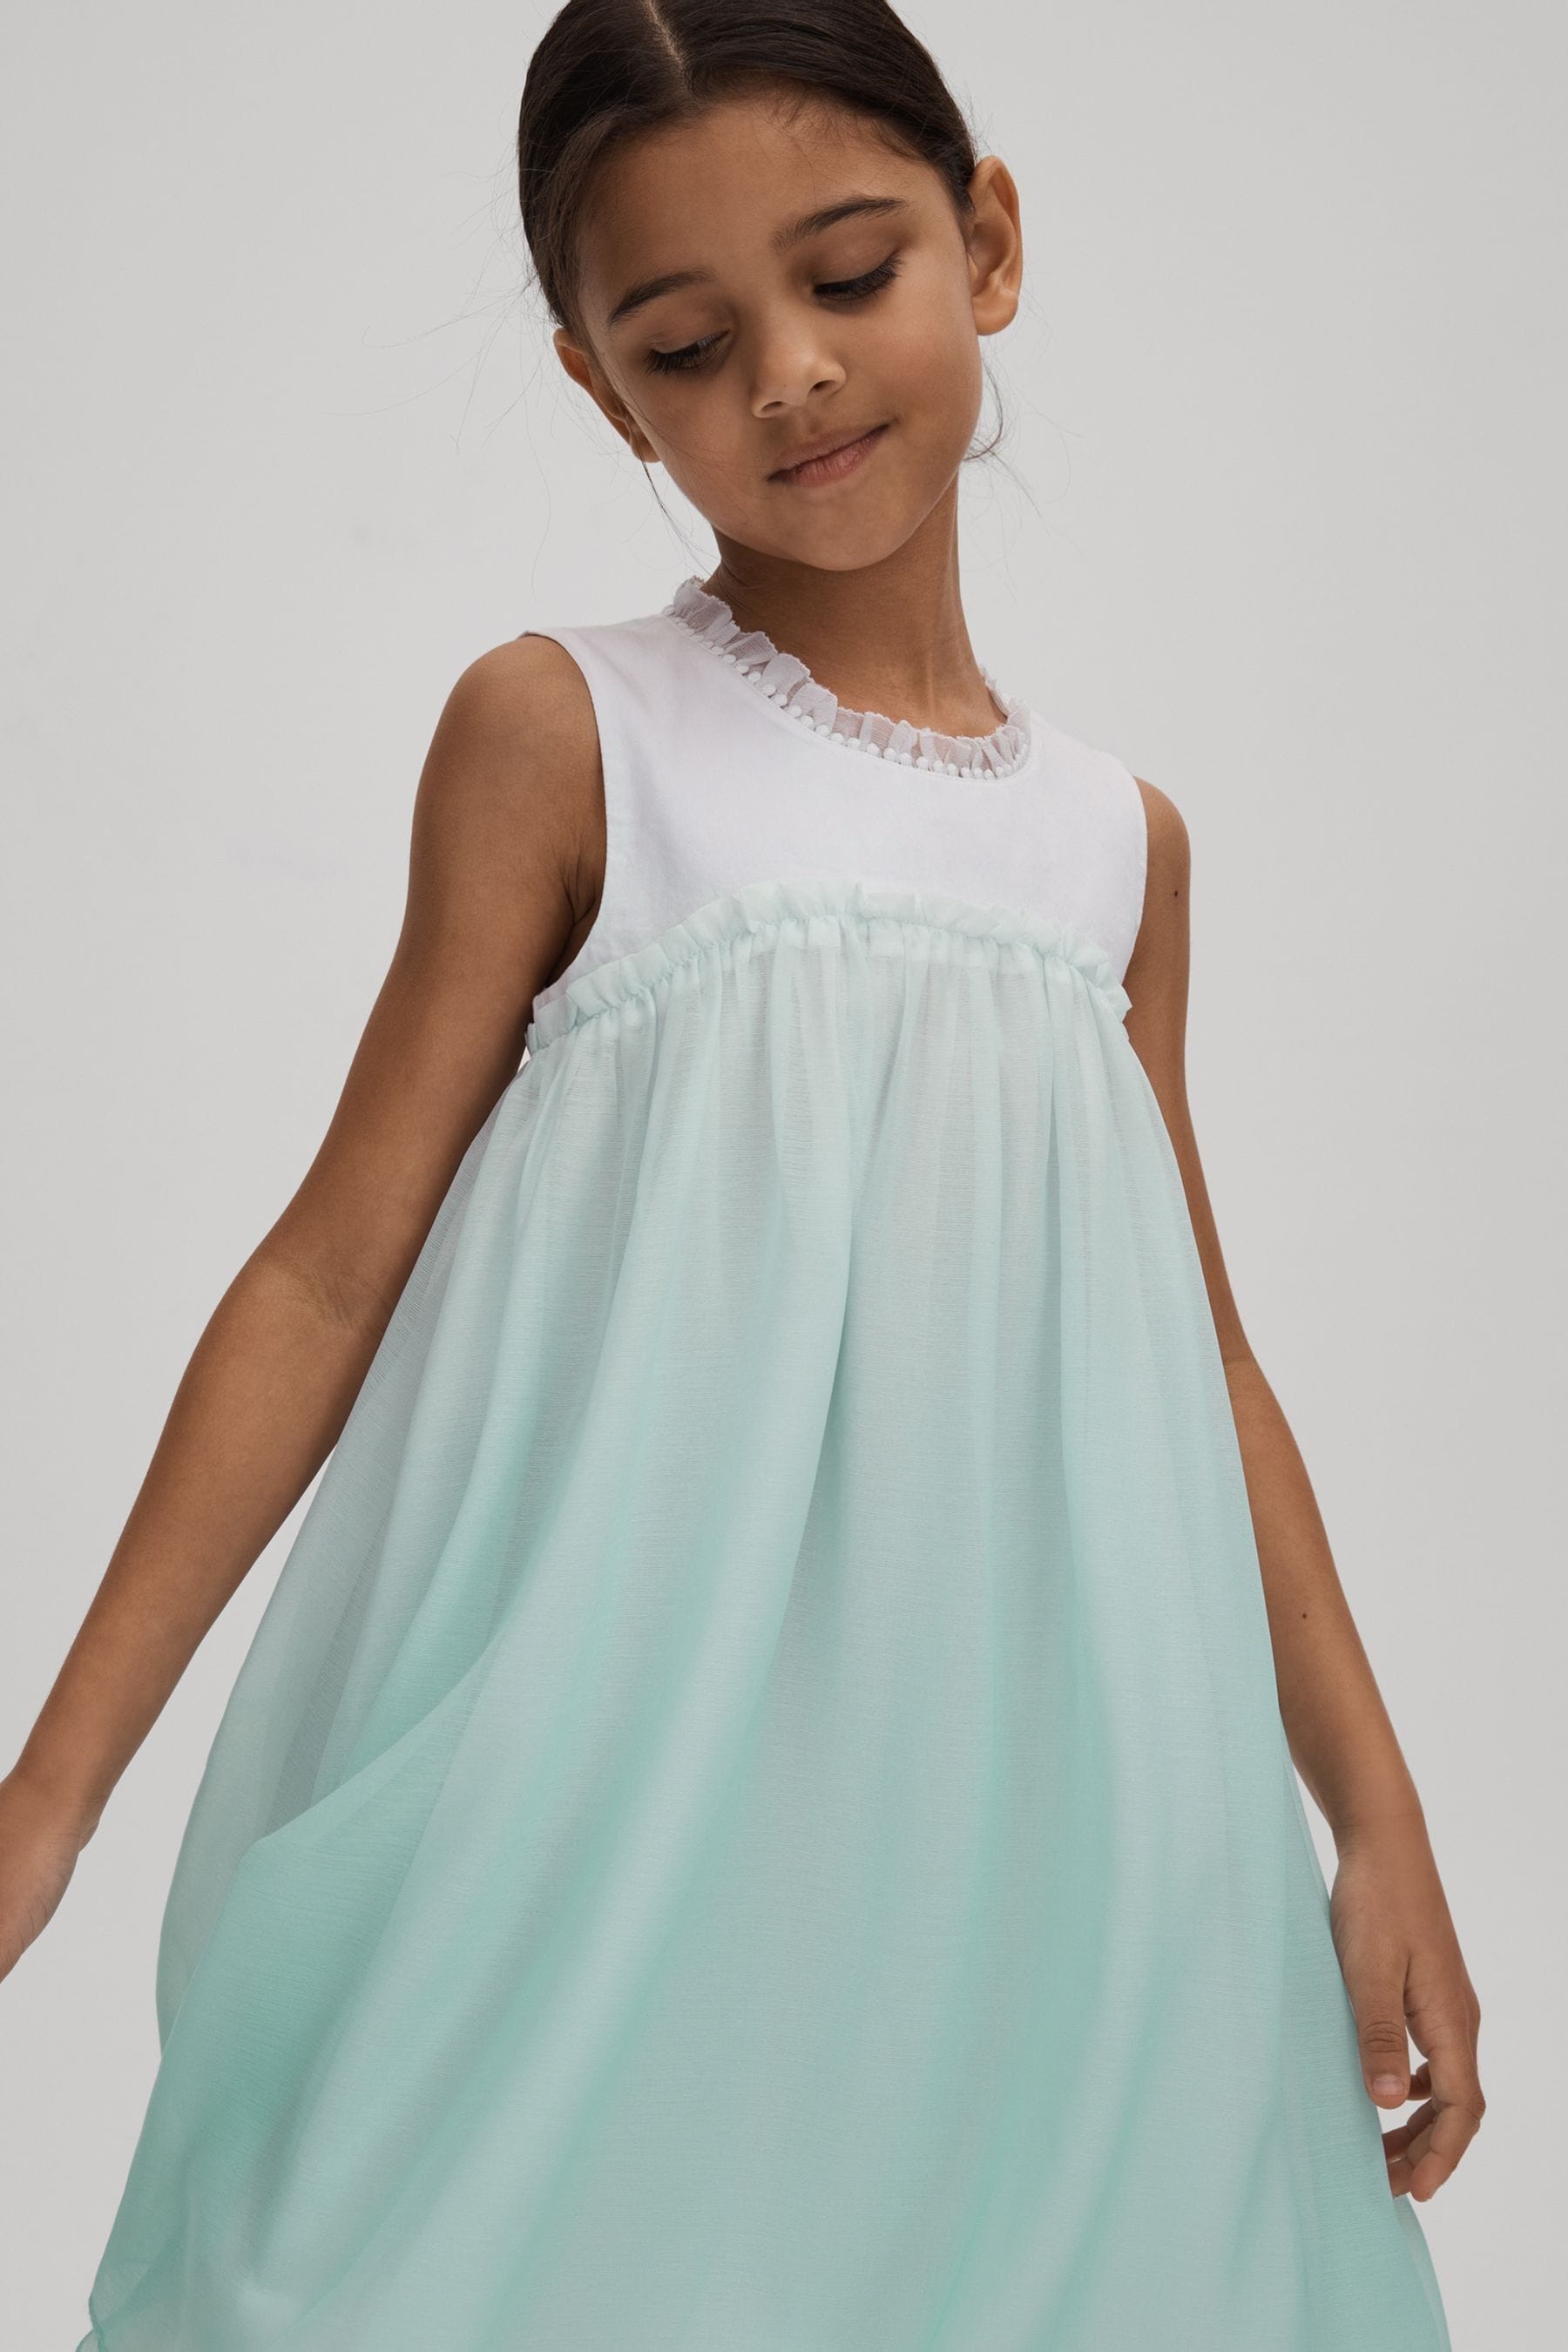 Reiss Kids' Coco - Blue Senior Ombre Tulle Dress, 9 - 10 Years